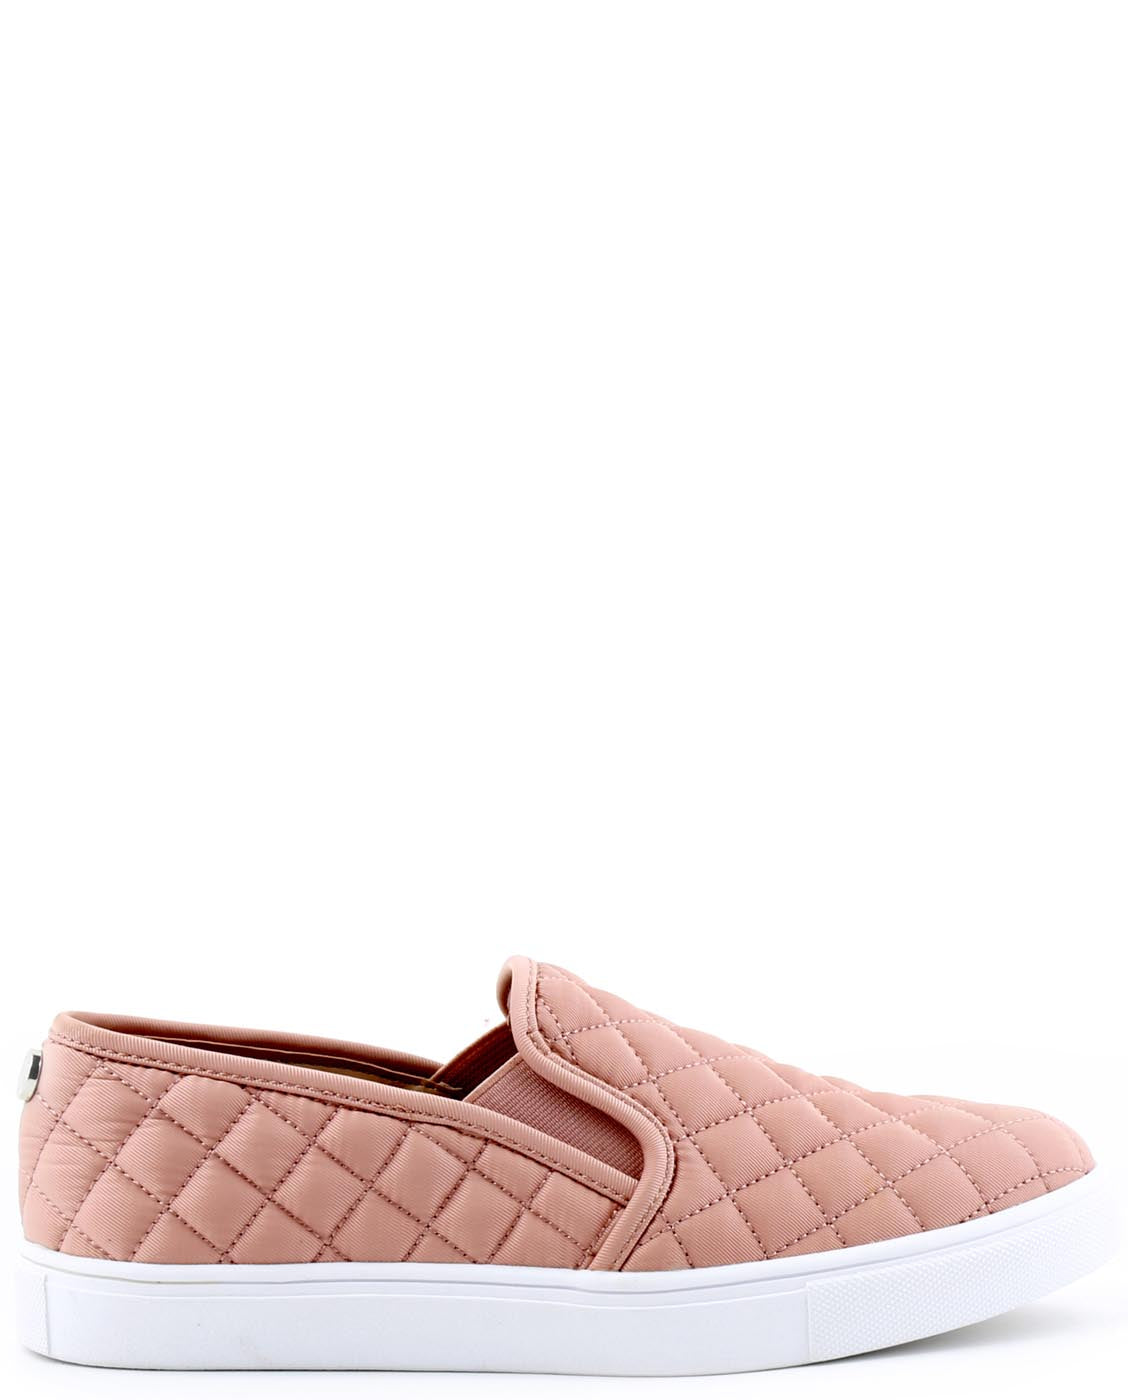 steve madden quilted flats